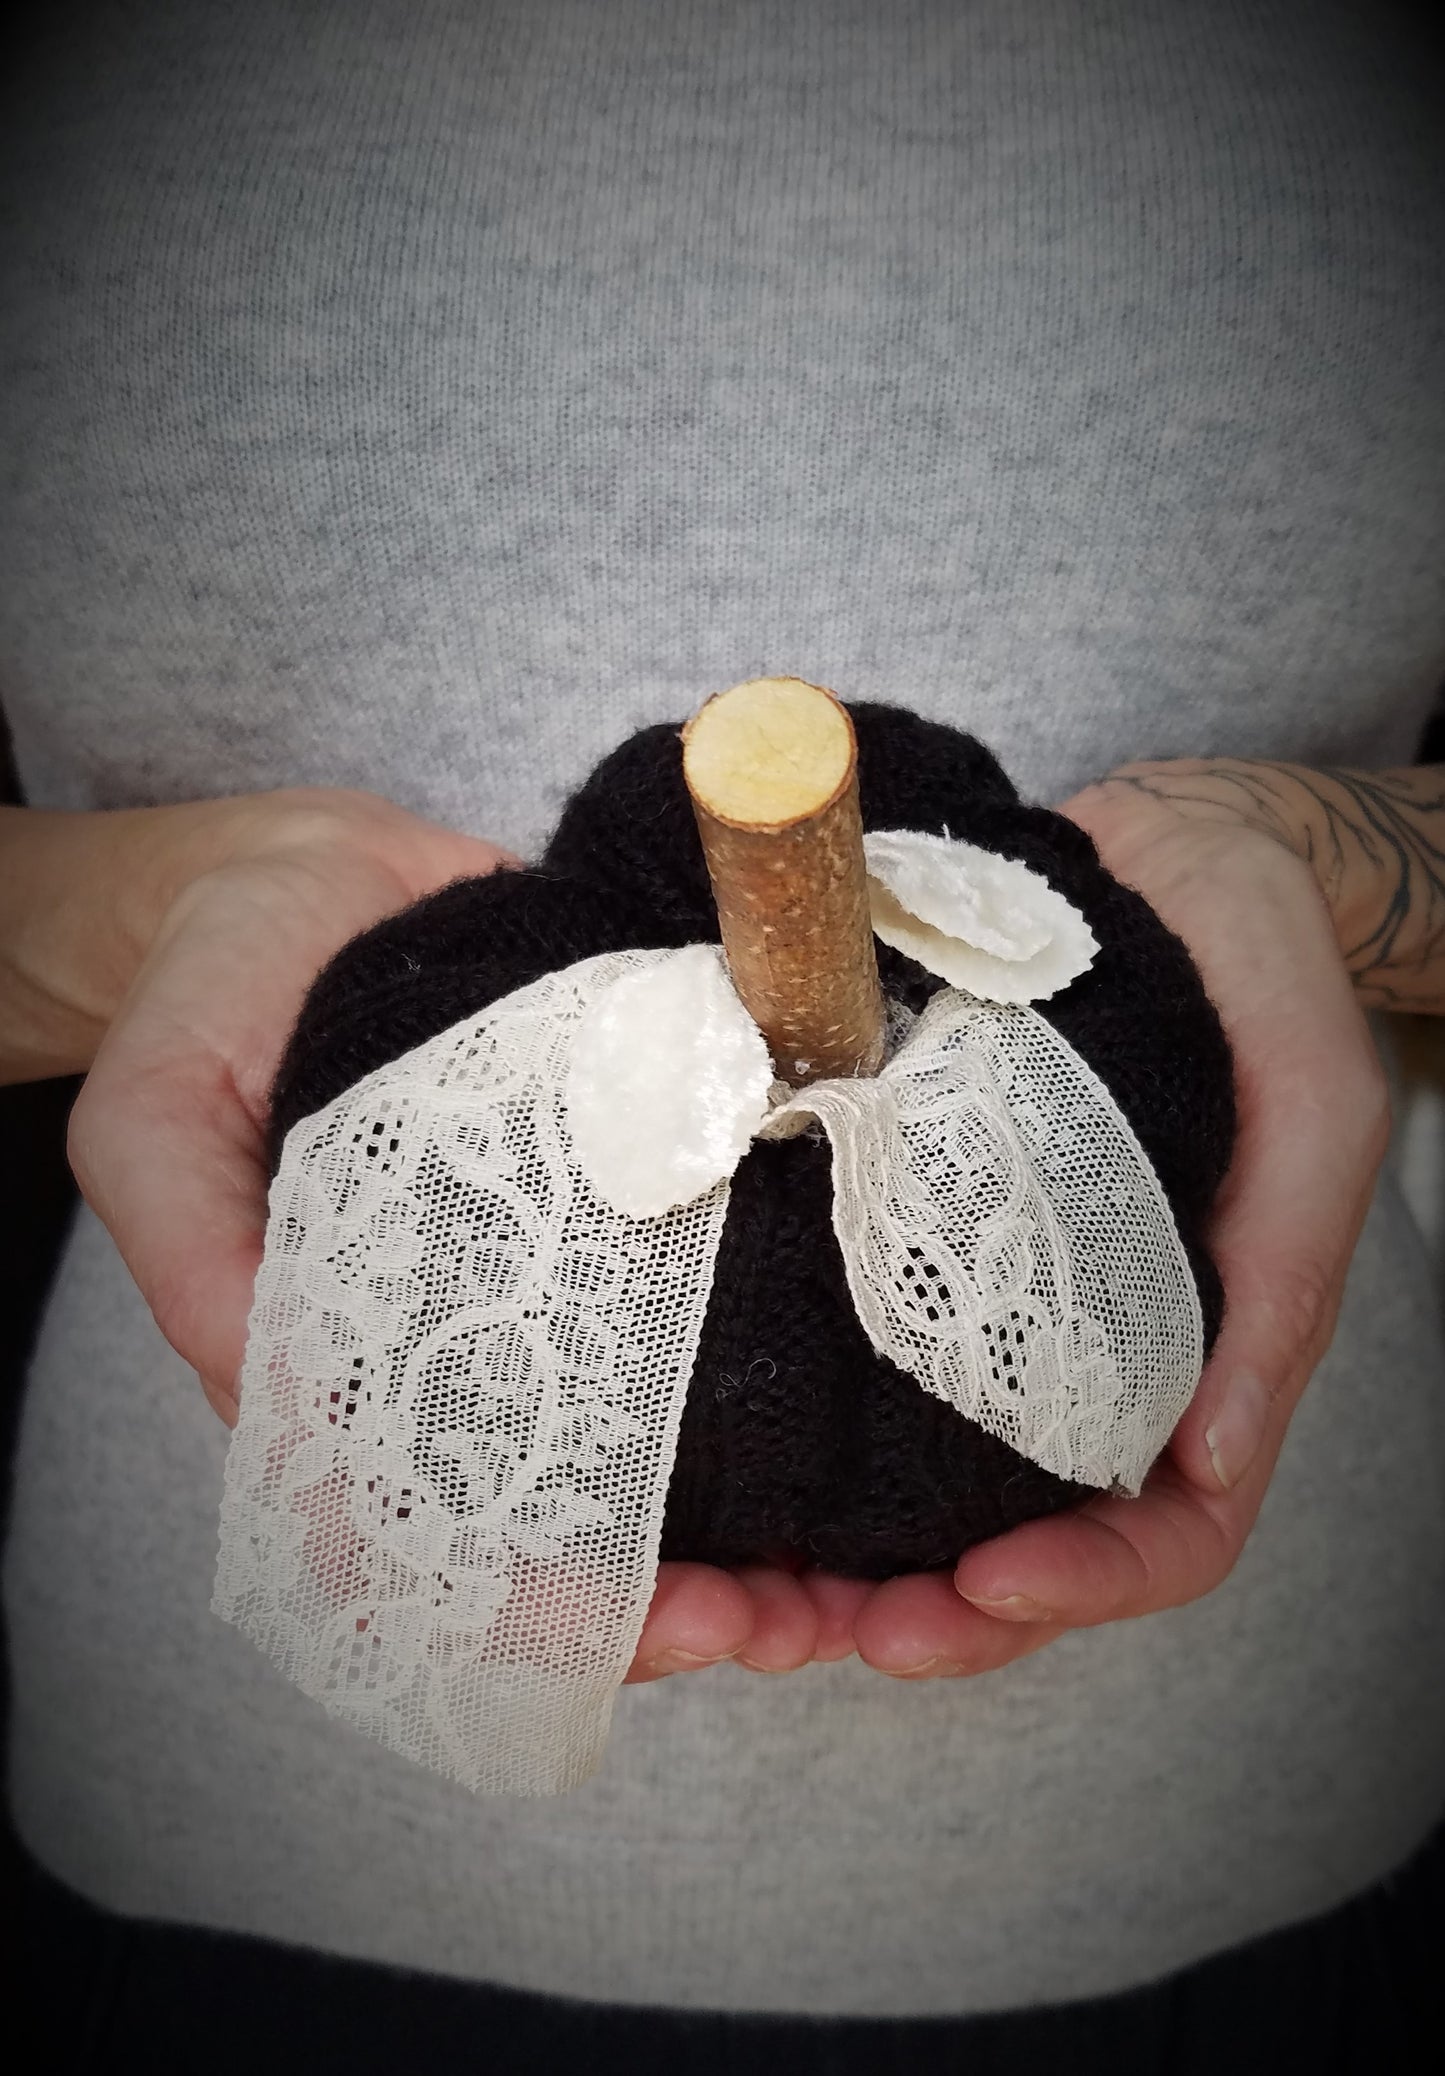 Mini Black Knit Pumpkin Pillow Pouf, With Velvet Leaves, Ivory Lace and Wooden Stem